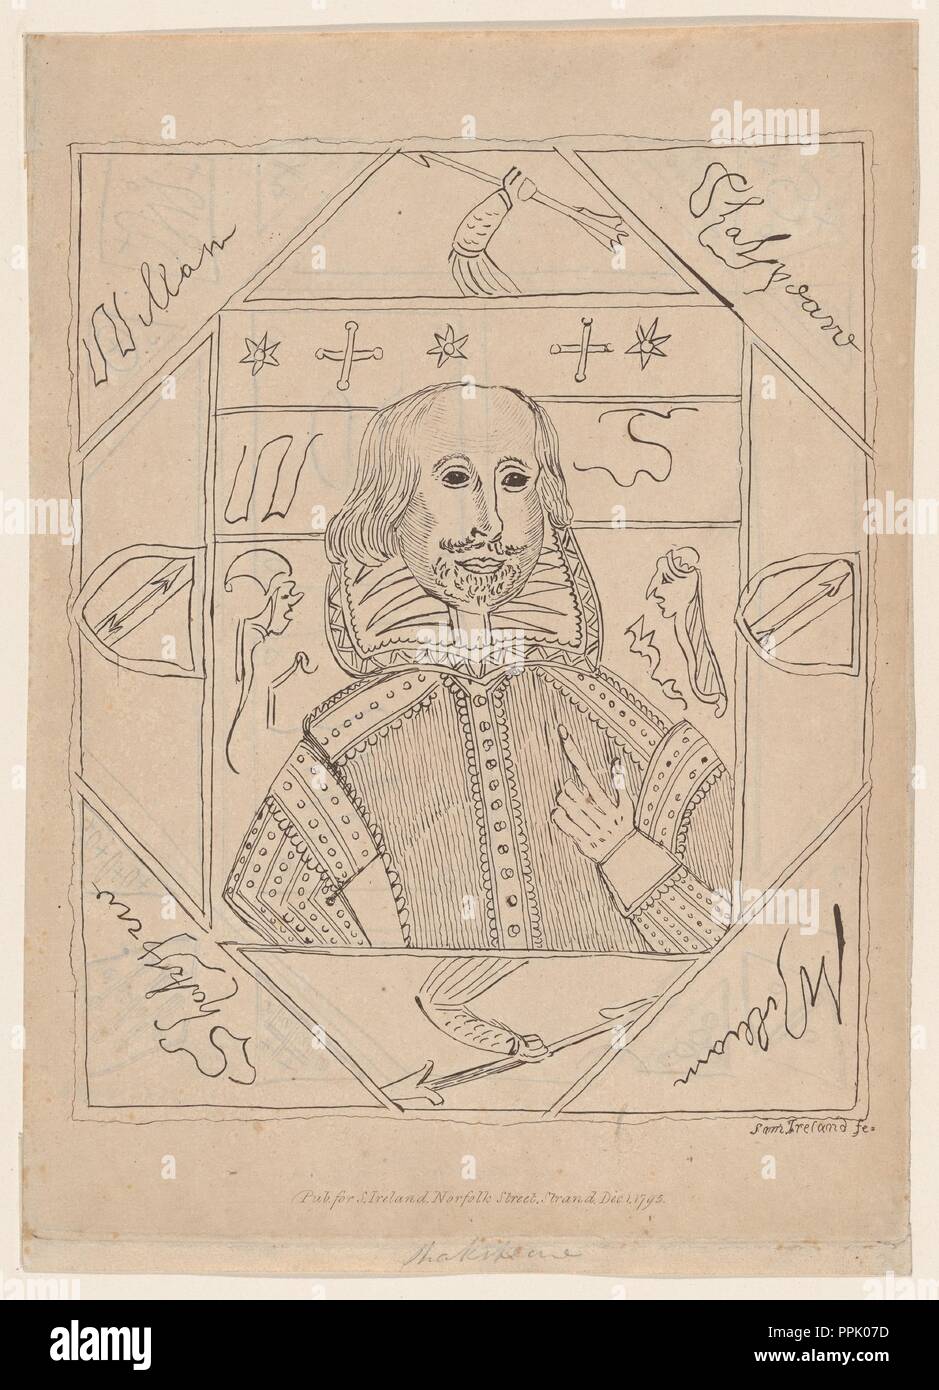 William Shakespeare. Artist and publisher: Etched and published by Samuel Ireland (British, active from ca. 1760, died London 1800). Dimensions: Plate: 9 1/4 × 6 11/16 in. (23.5 × 17 cm)  Sheet: 9 7/16 × 6 11/16 in. (24 × 17 cm). Sitter: William Shakespeare (British, Stratford-upon-Avon 1564-1616 Stratford-upon-Avon). Date: 1795.  This etching reproduces a supposed self-portrait sketch by Shakespeare actually created by William Henry Ireland during a famous forgery scandal of the 1790s. Ireland faked a cache of letters, documents, and drafts of plays calculated to shed light on the Bard's life Stock Photo